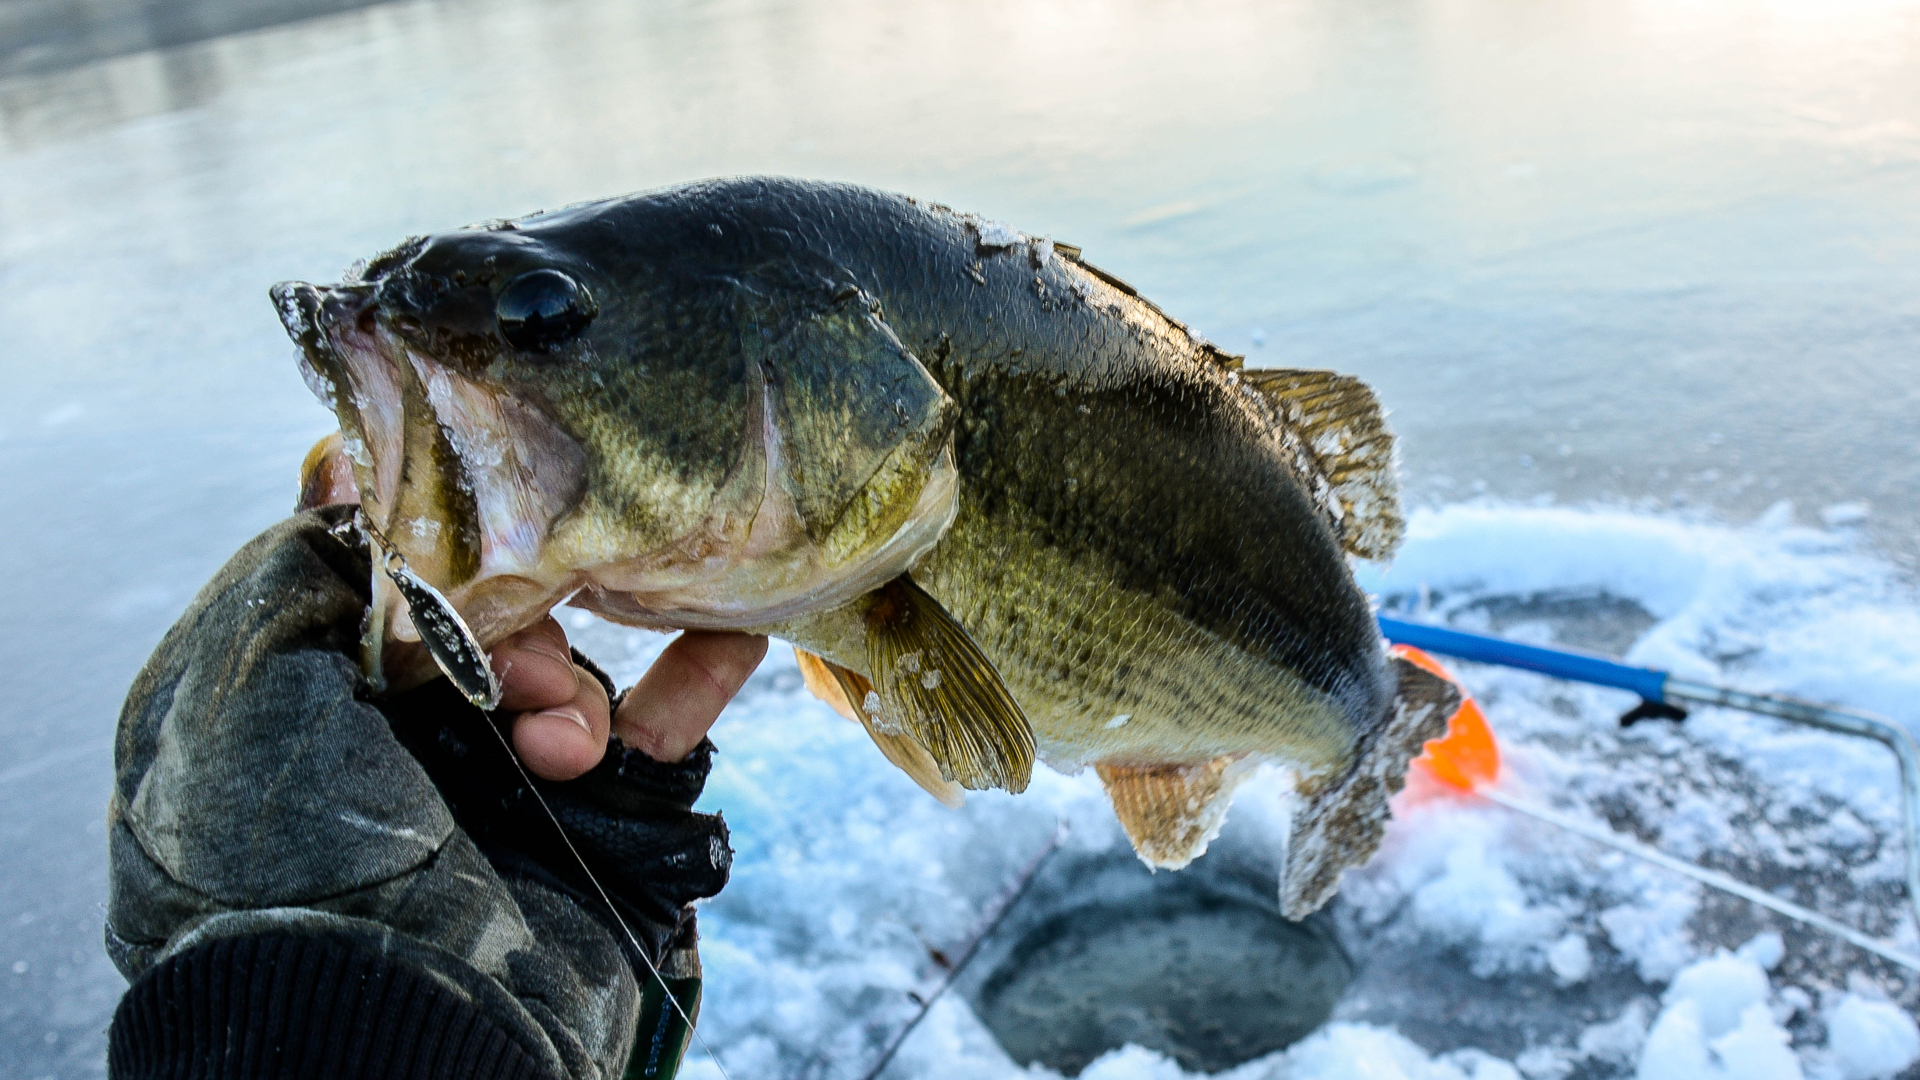 Live bait vs artificial lures for ice fishing for bass